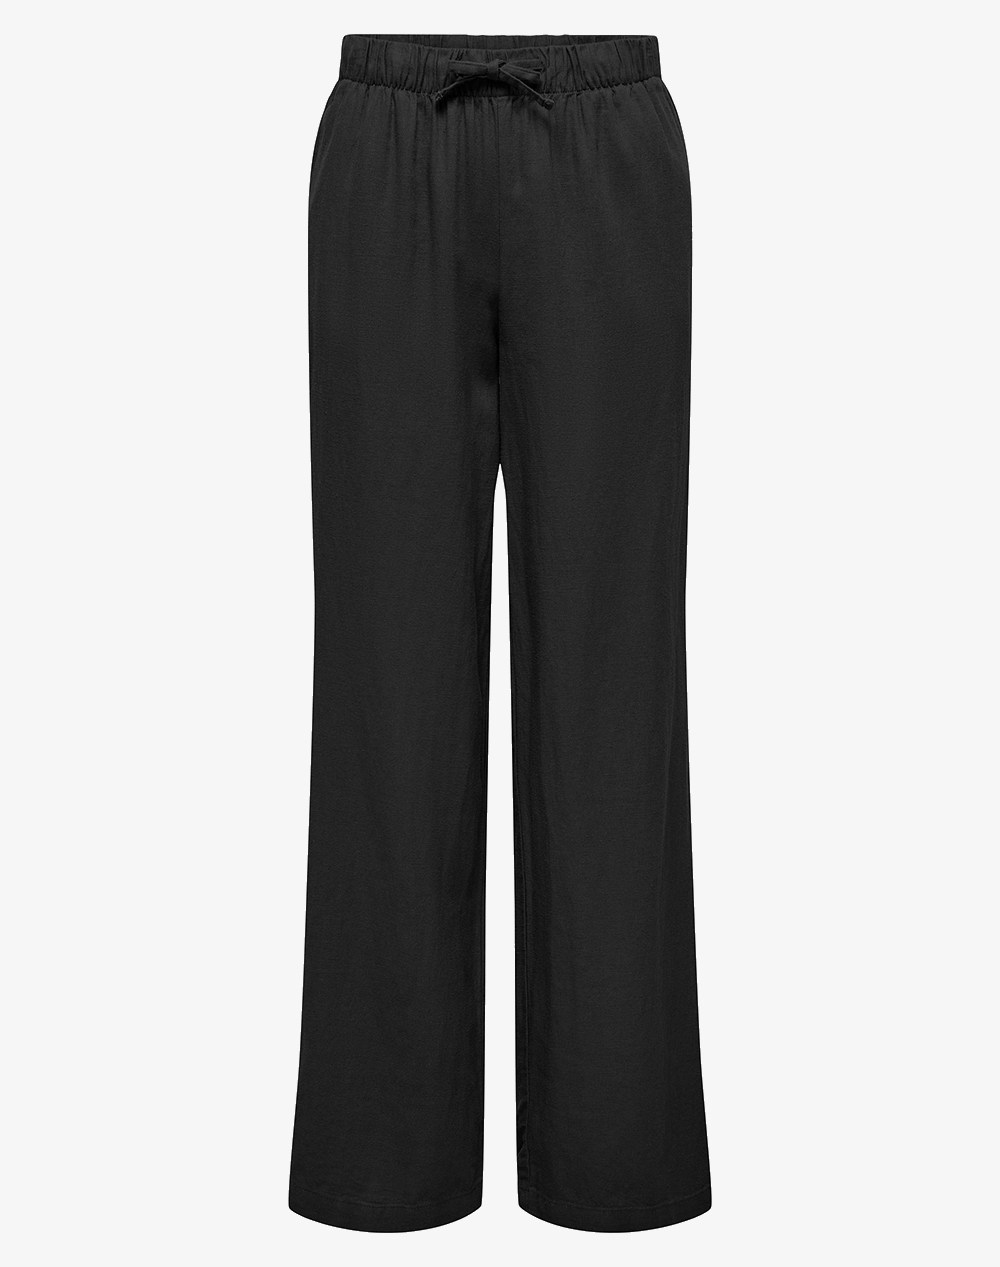 ONLY ONLCARO MW LINEN BL PULL-UP PANT CC PNT 15291807-BLACK Black 3810AONLY2000072_2813